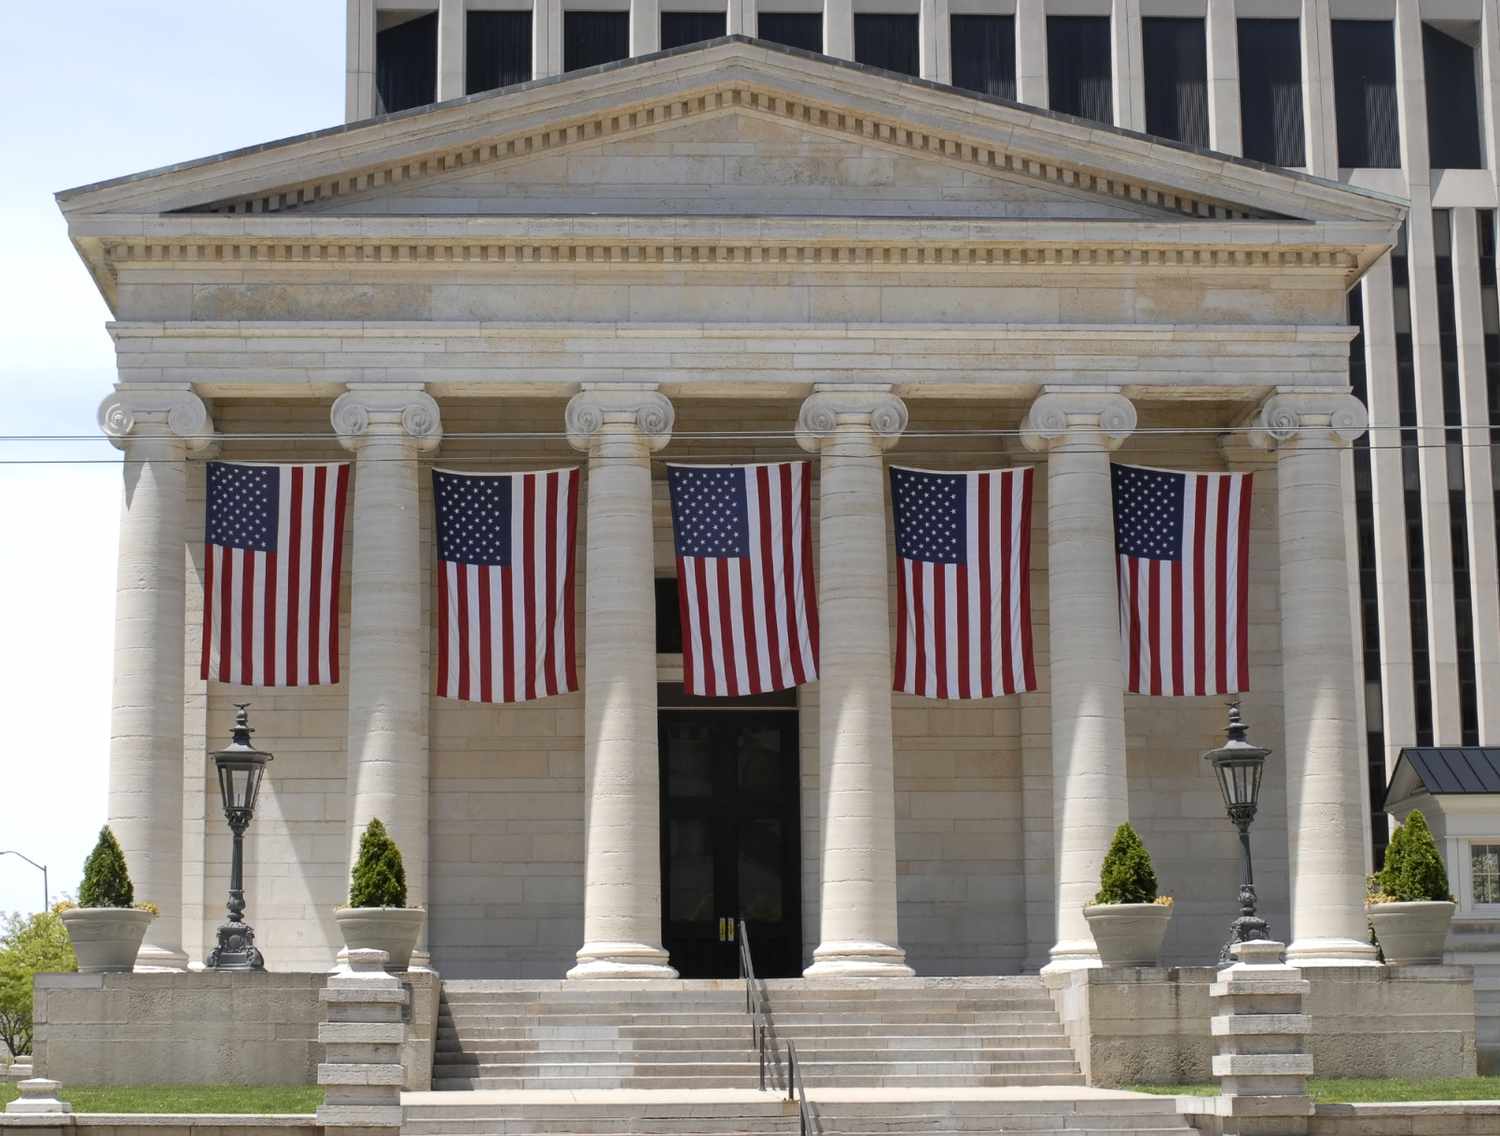 Greek Revival courthouse with American flags.